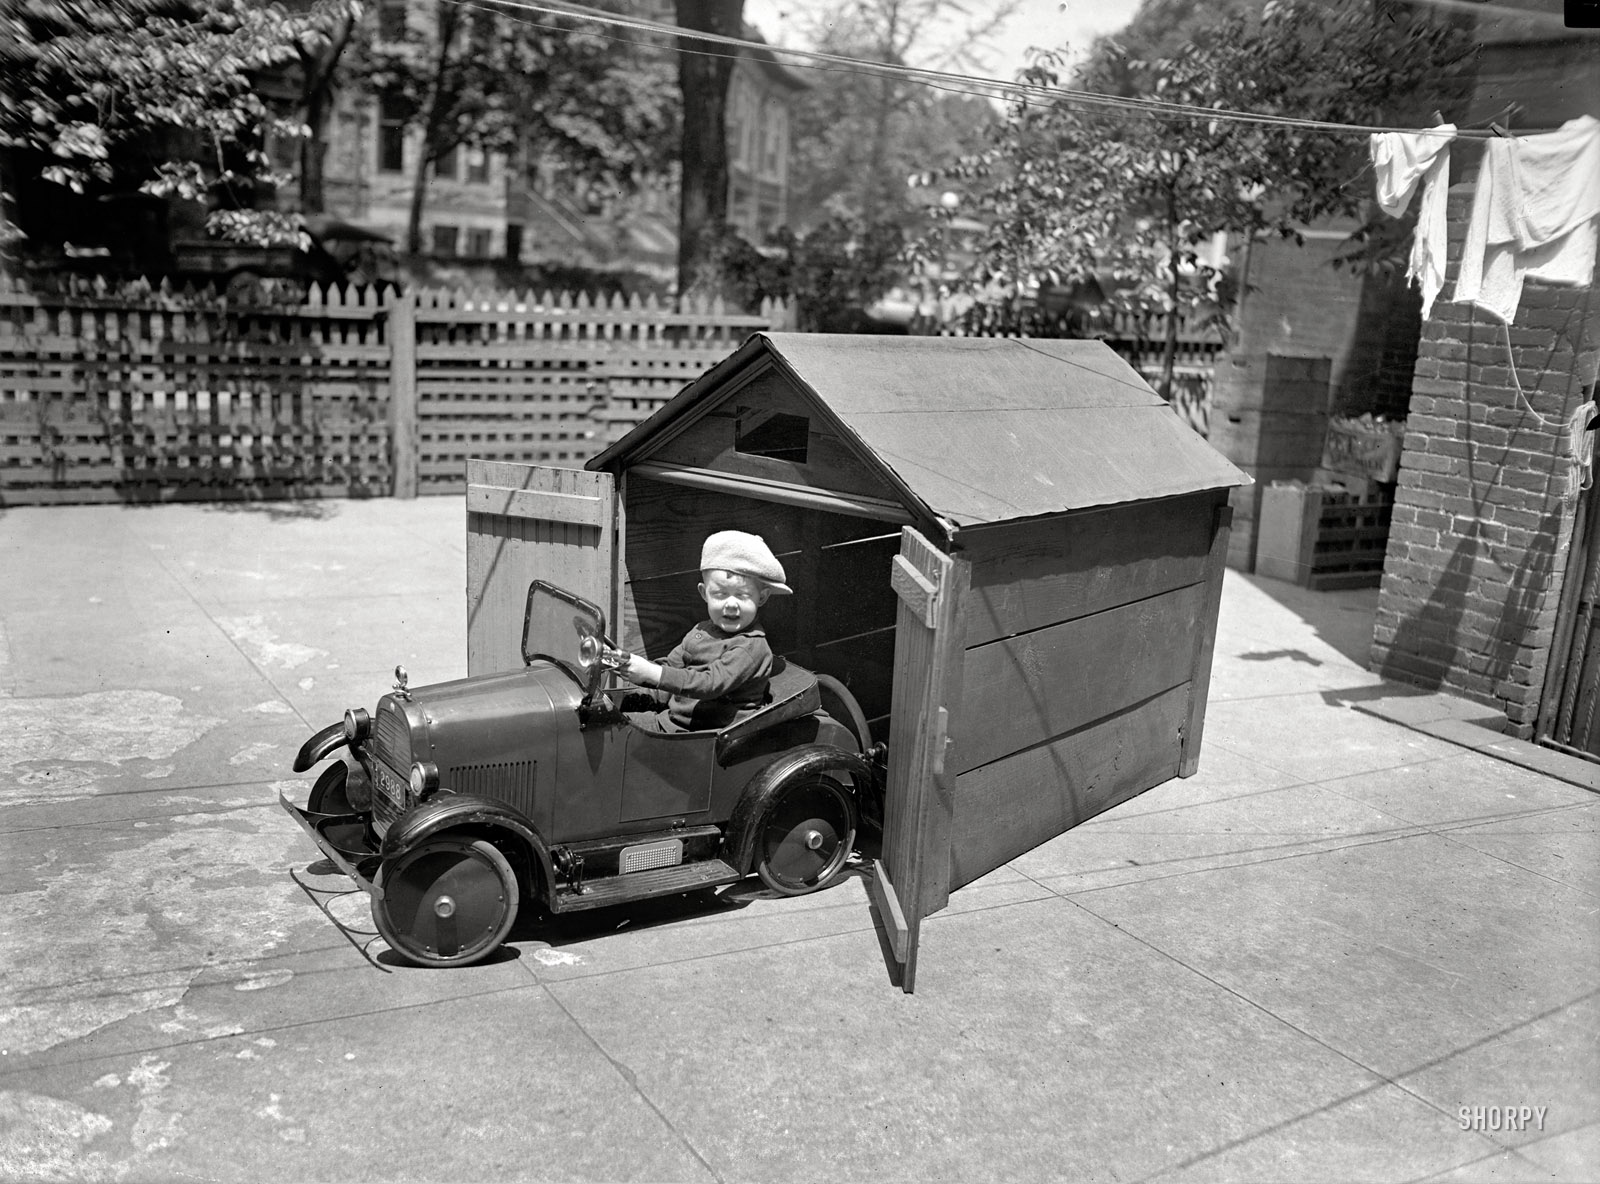 May 19, 1925. "Rogers Curtis Johnson." Headed out for a little spin. National Photo Company Collection glass negative. View full size.